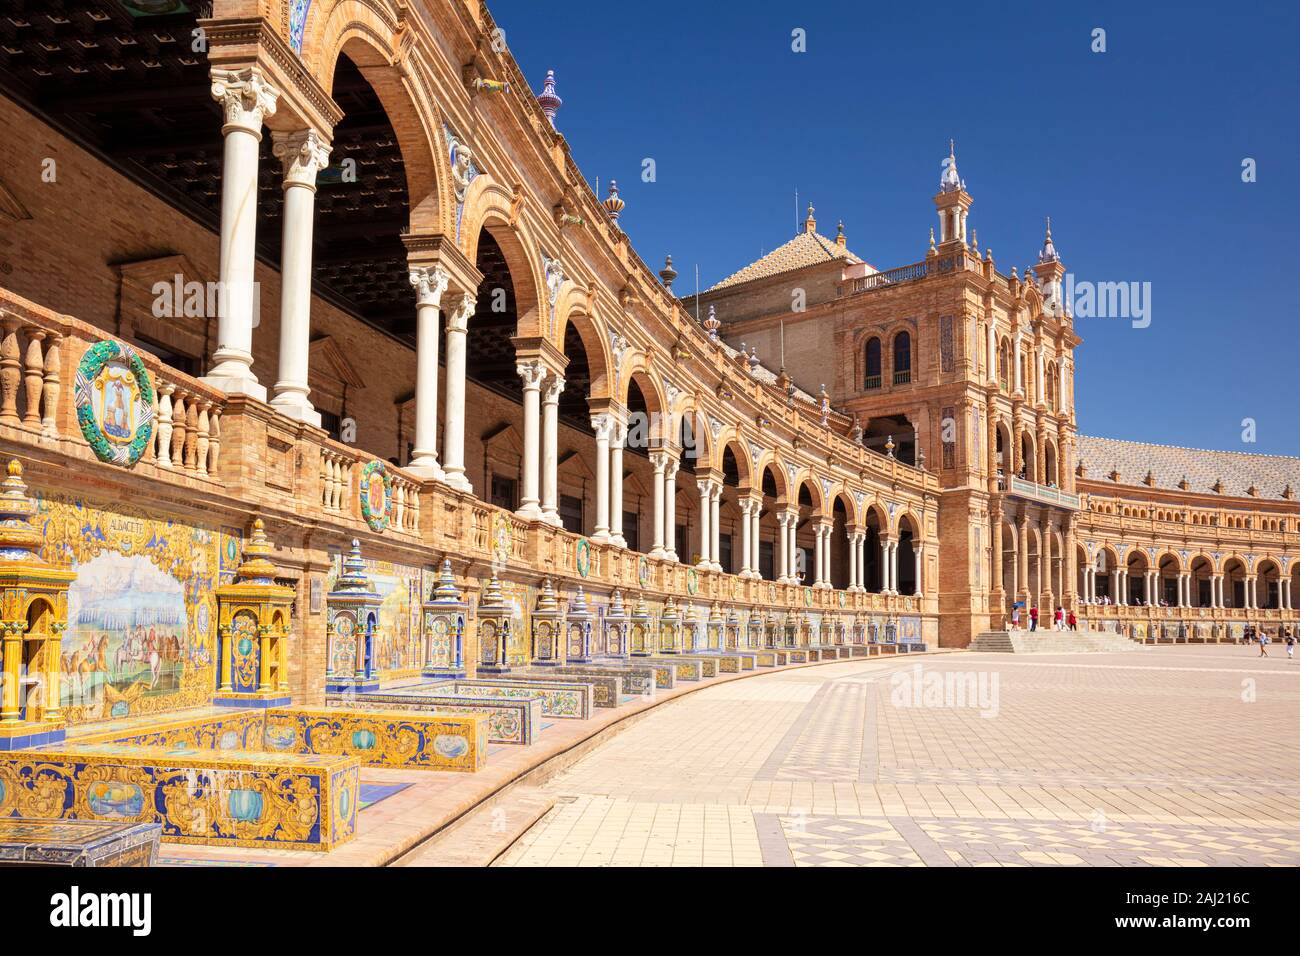 Plaza de Espana with ceramic tiled alcoves and arches, Maria Luisa Park, Seville, Andalusia, Spain, Europe Stock Photo